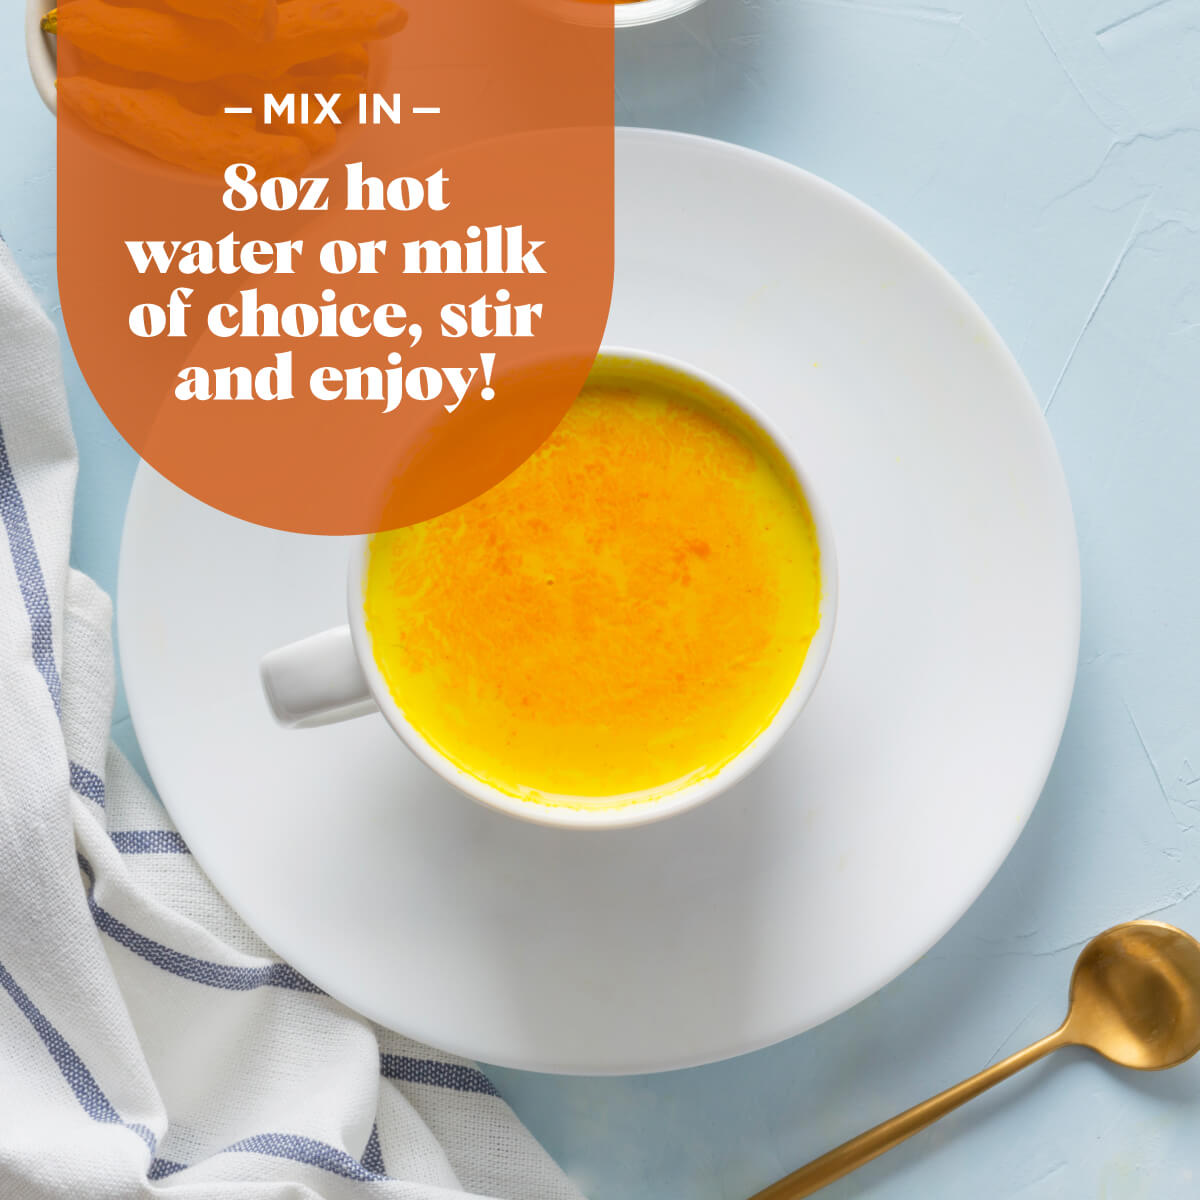 Mix in 8oz. hot water or milk of choice, stir and enjoy!